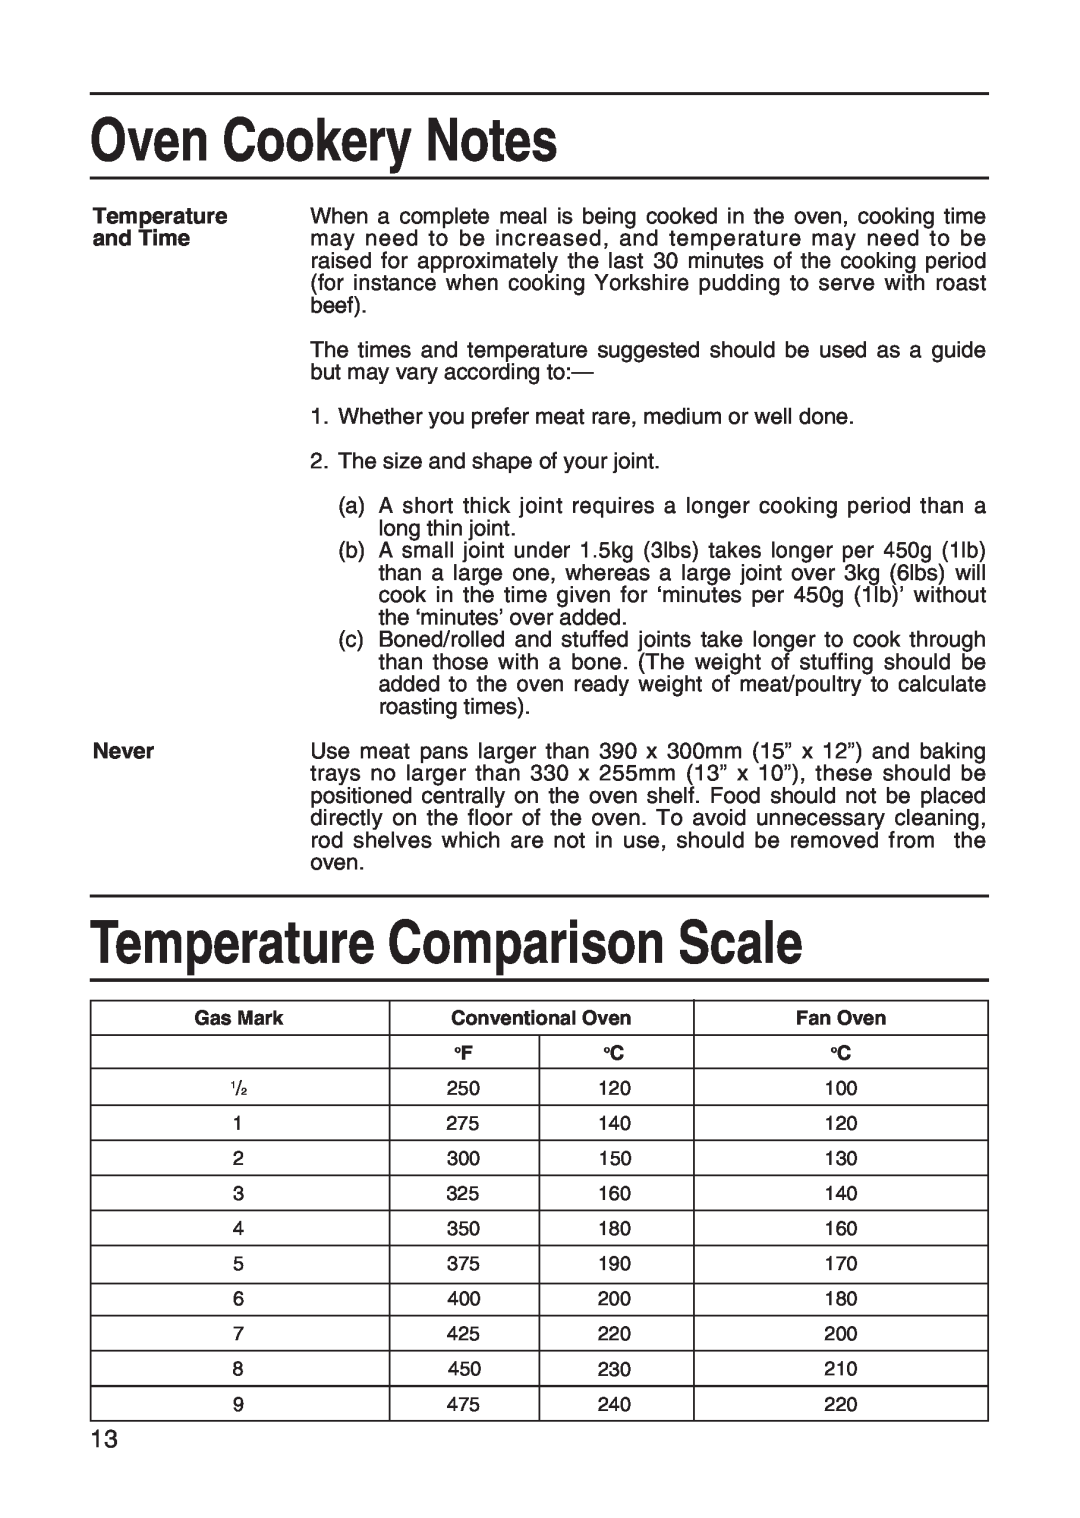 Hotpoint EH10 manual Temperature Comparison Scale, Oven Cookery Notes, and Time, Never 